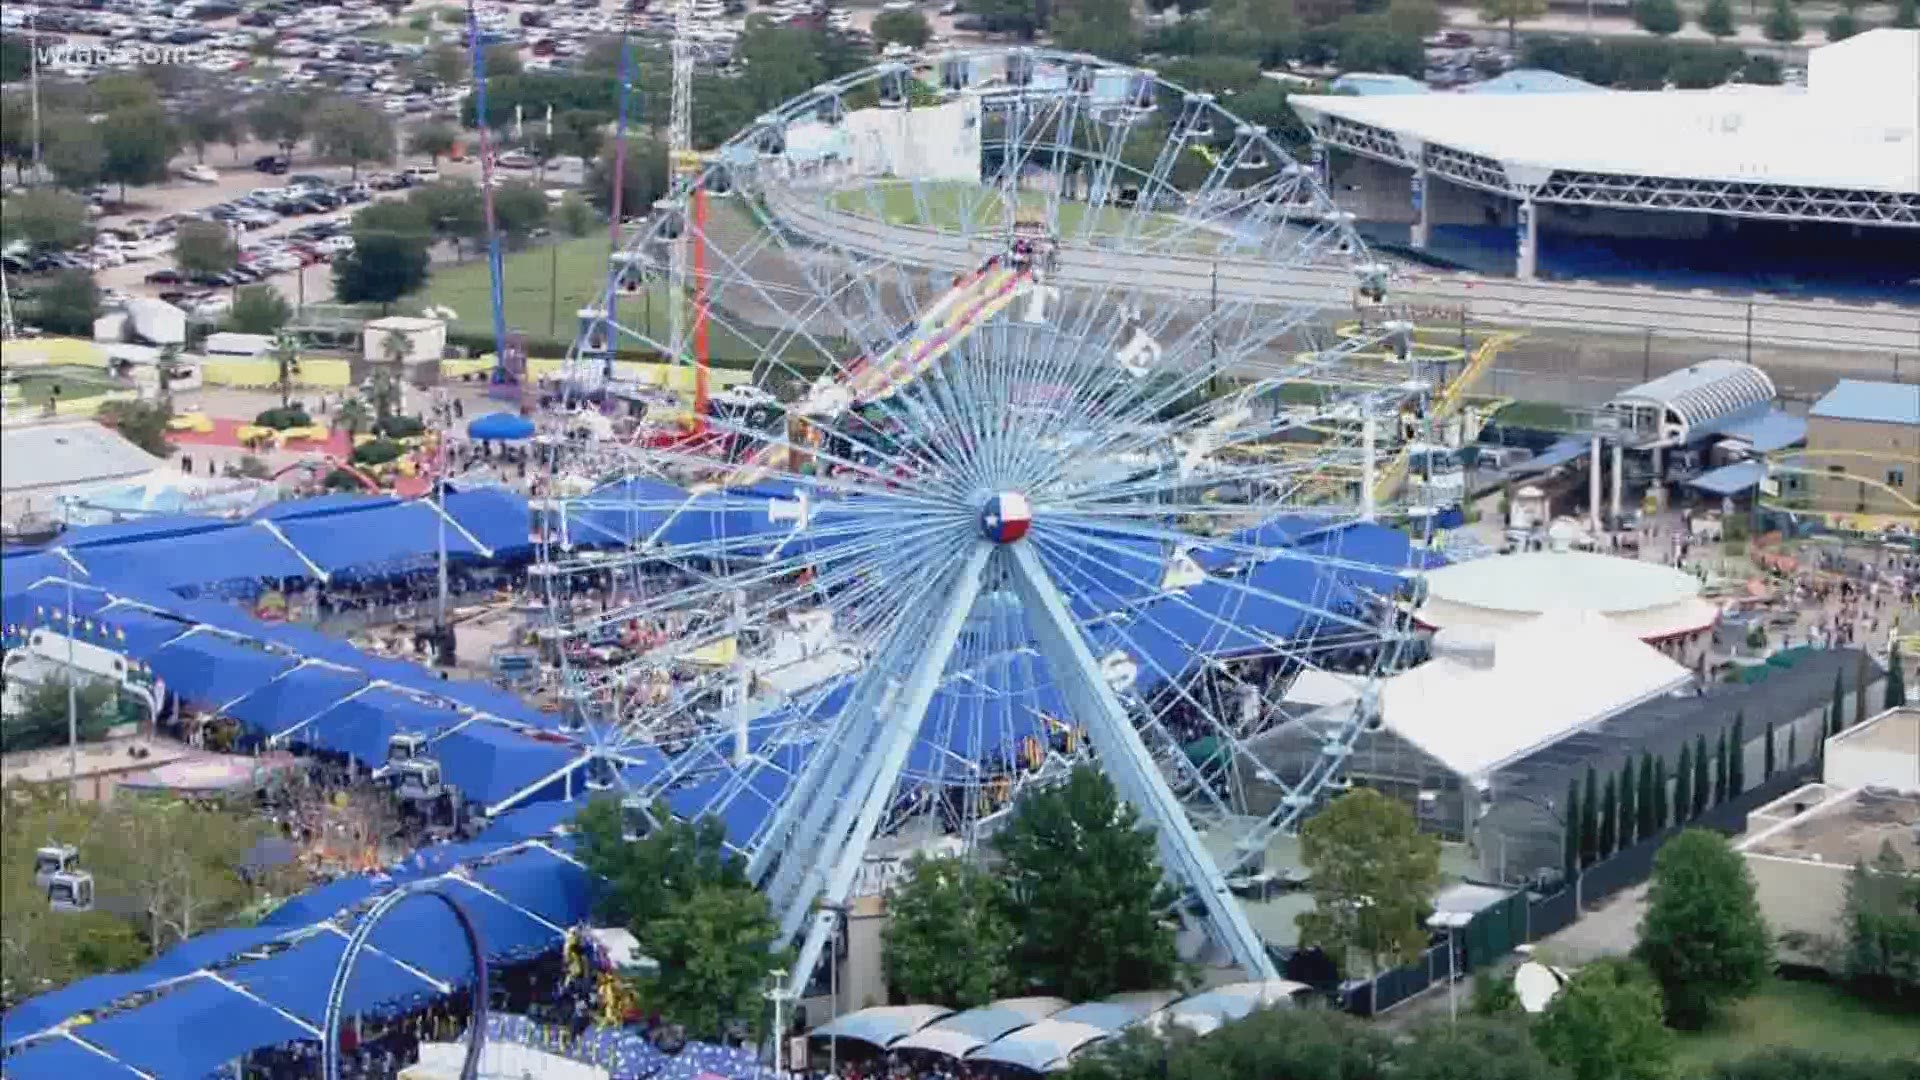 It will be the first time the fair has been canceled since World War II.